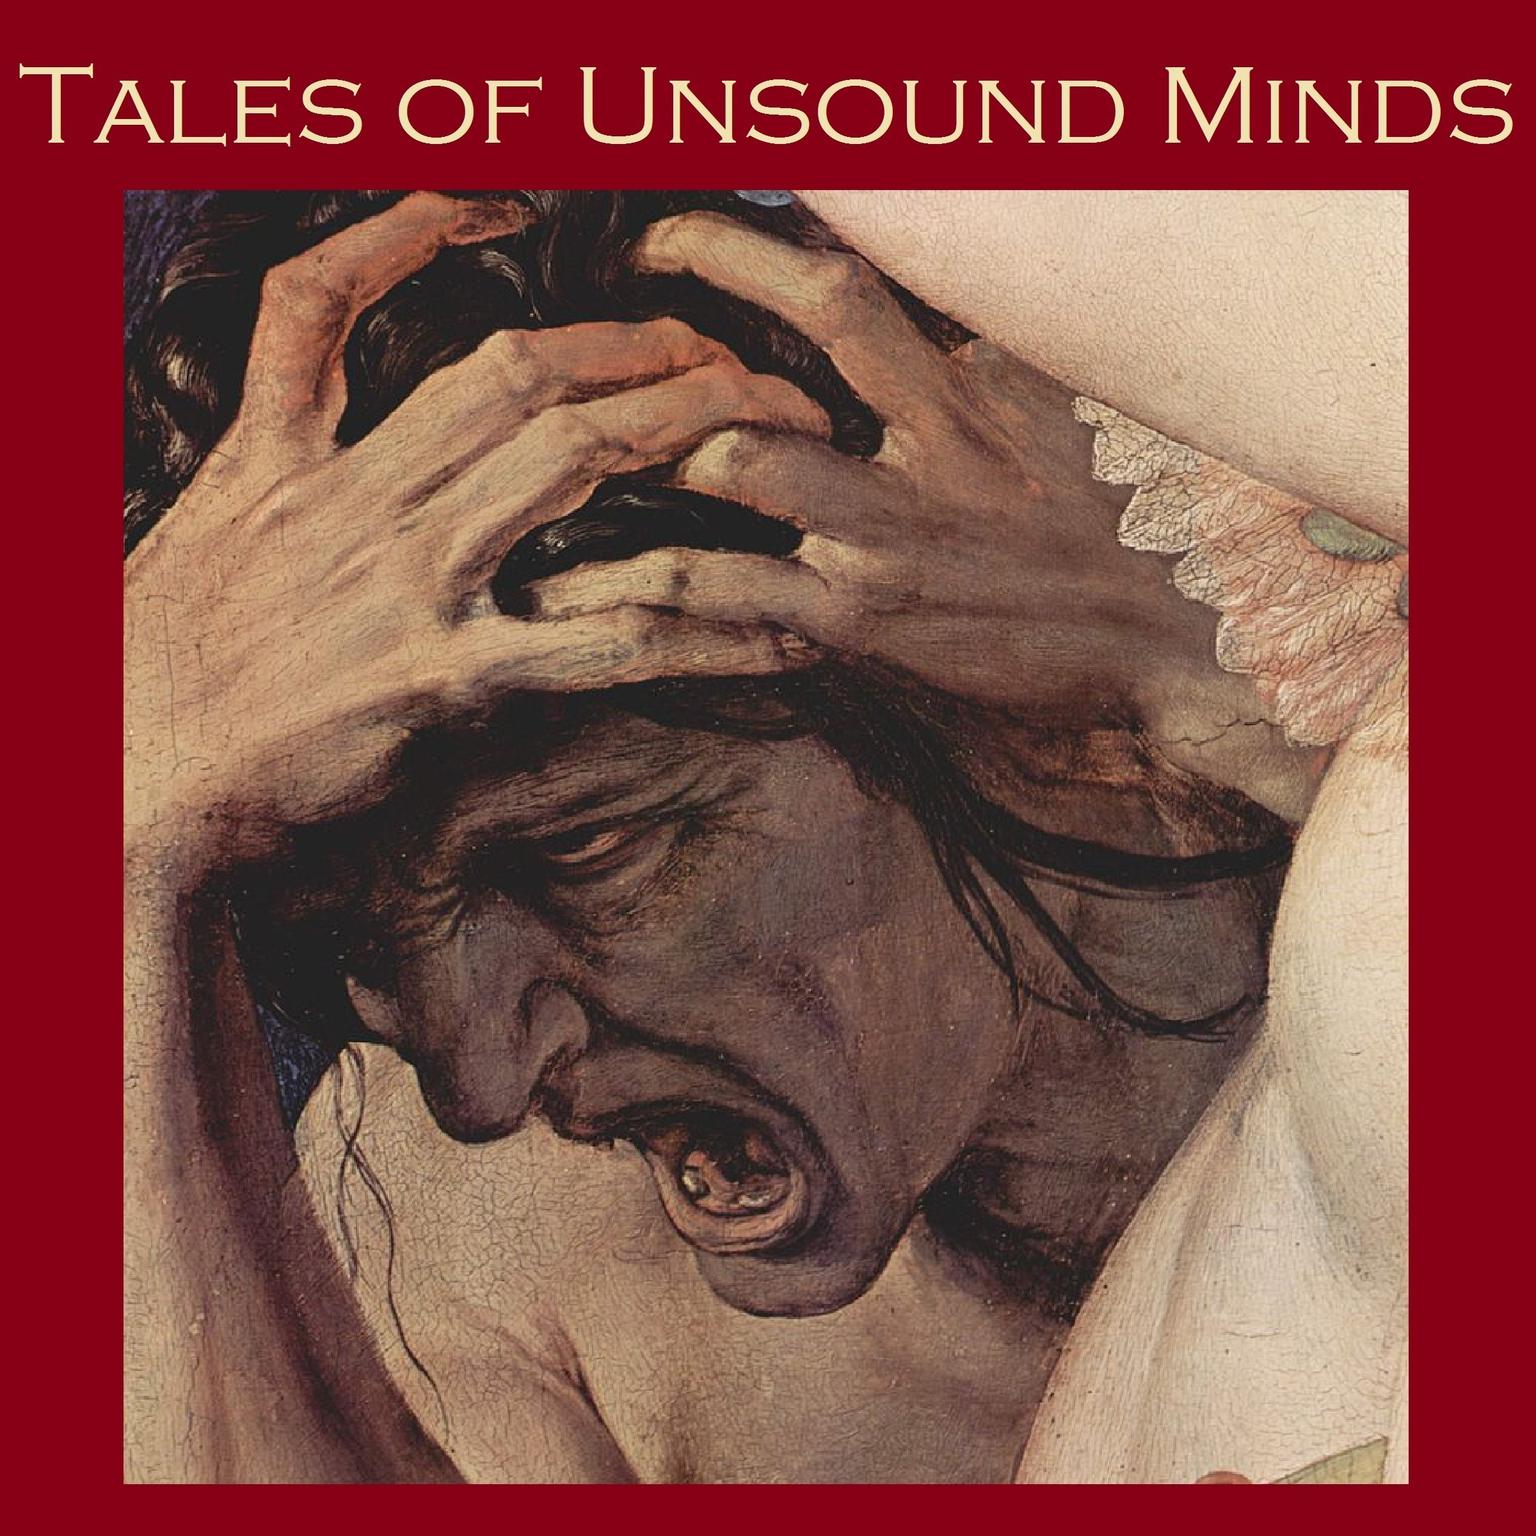 Tales of Unsound Minds: Horror Stories of Insanity and Eccentricity Audiobook, by various authors